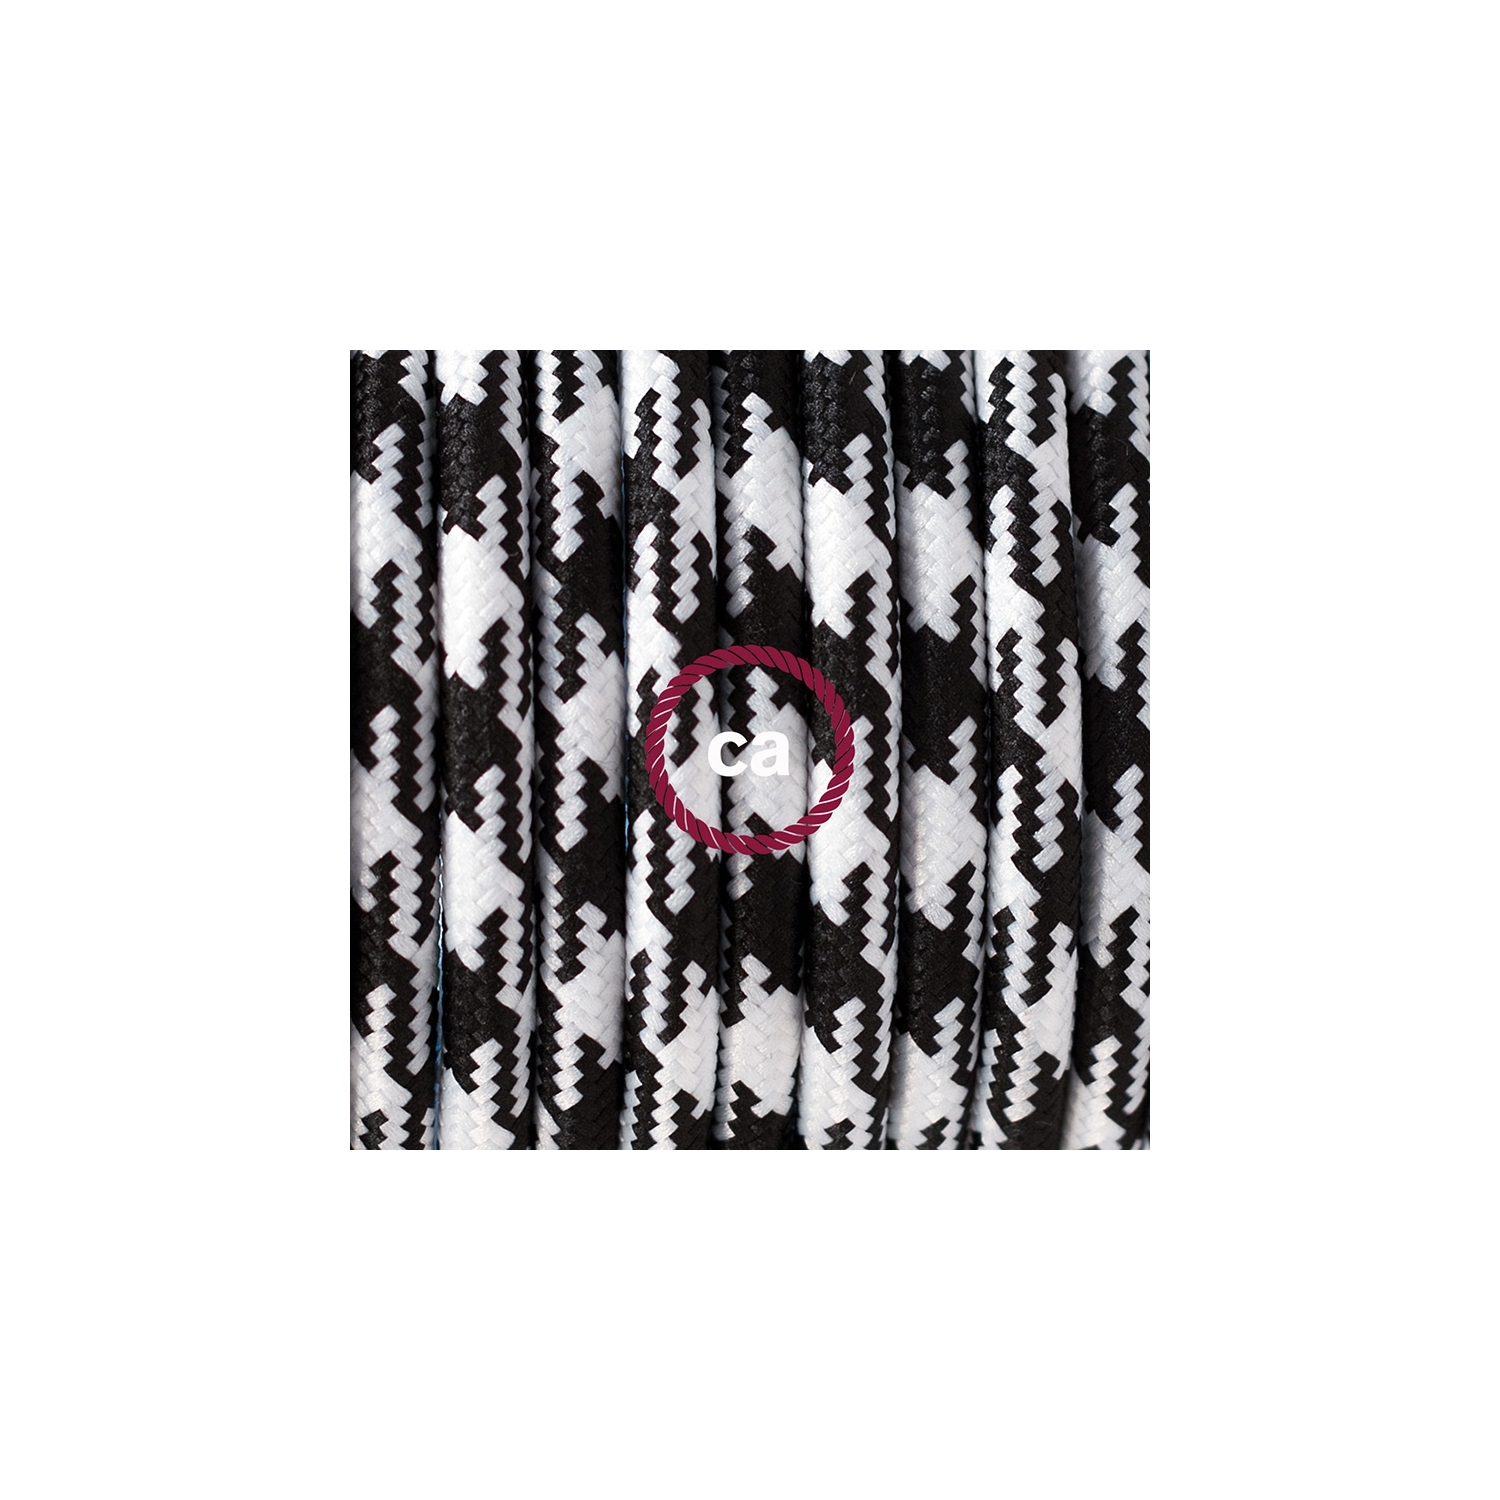 Plug-in Pendant for Lampshade with switch on socket | RP04 Black & White Houndstooth